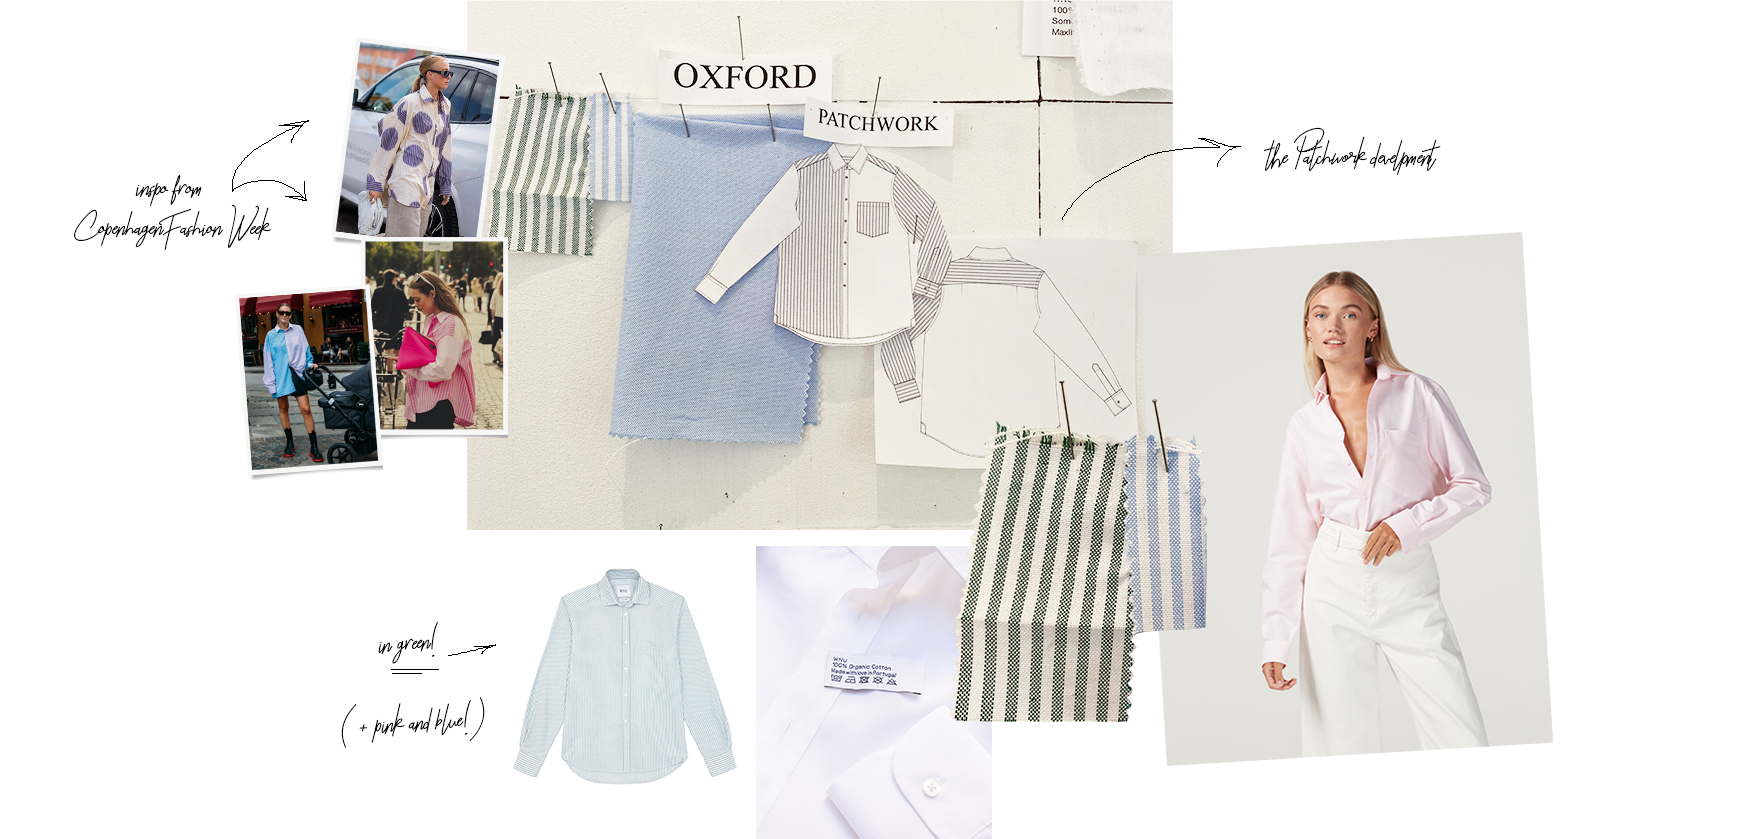 WNU DNA: This is the Oxford – With Nothing Underneath